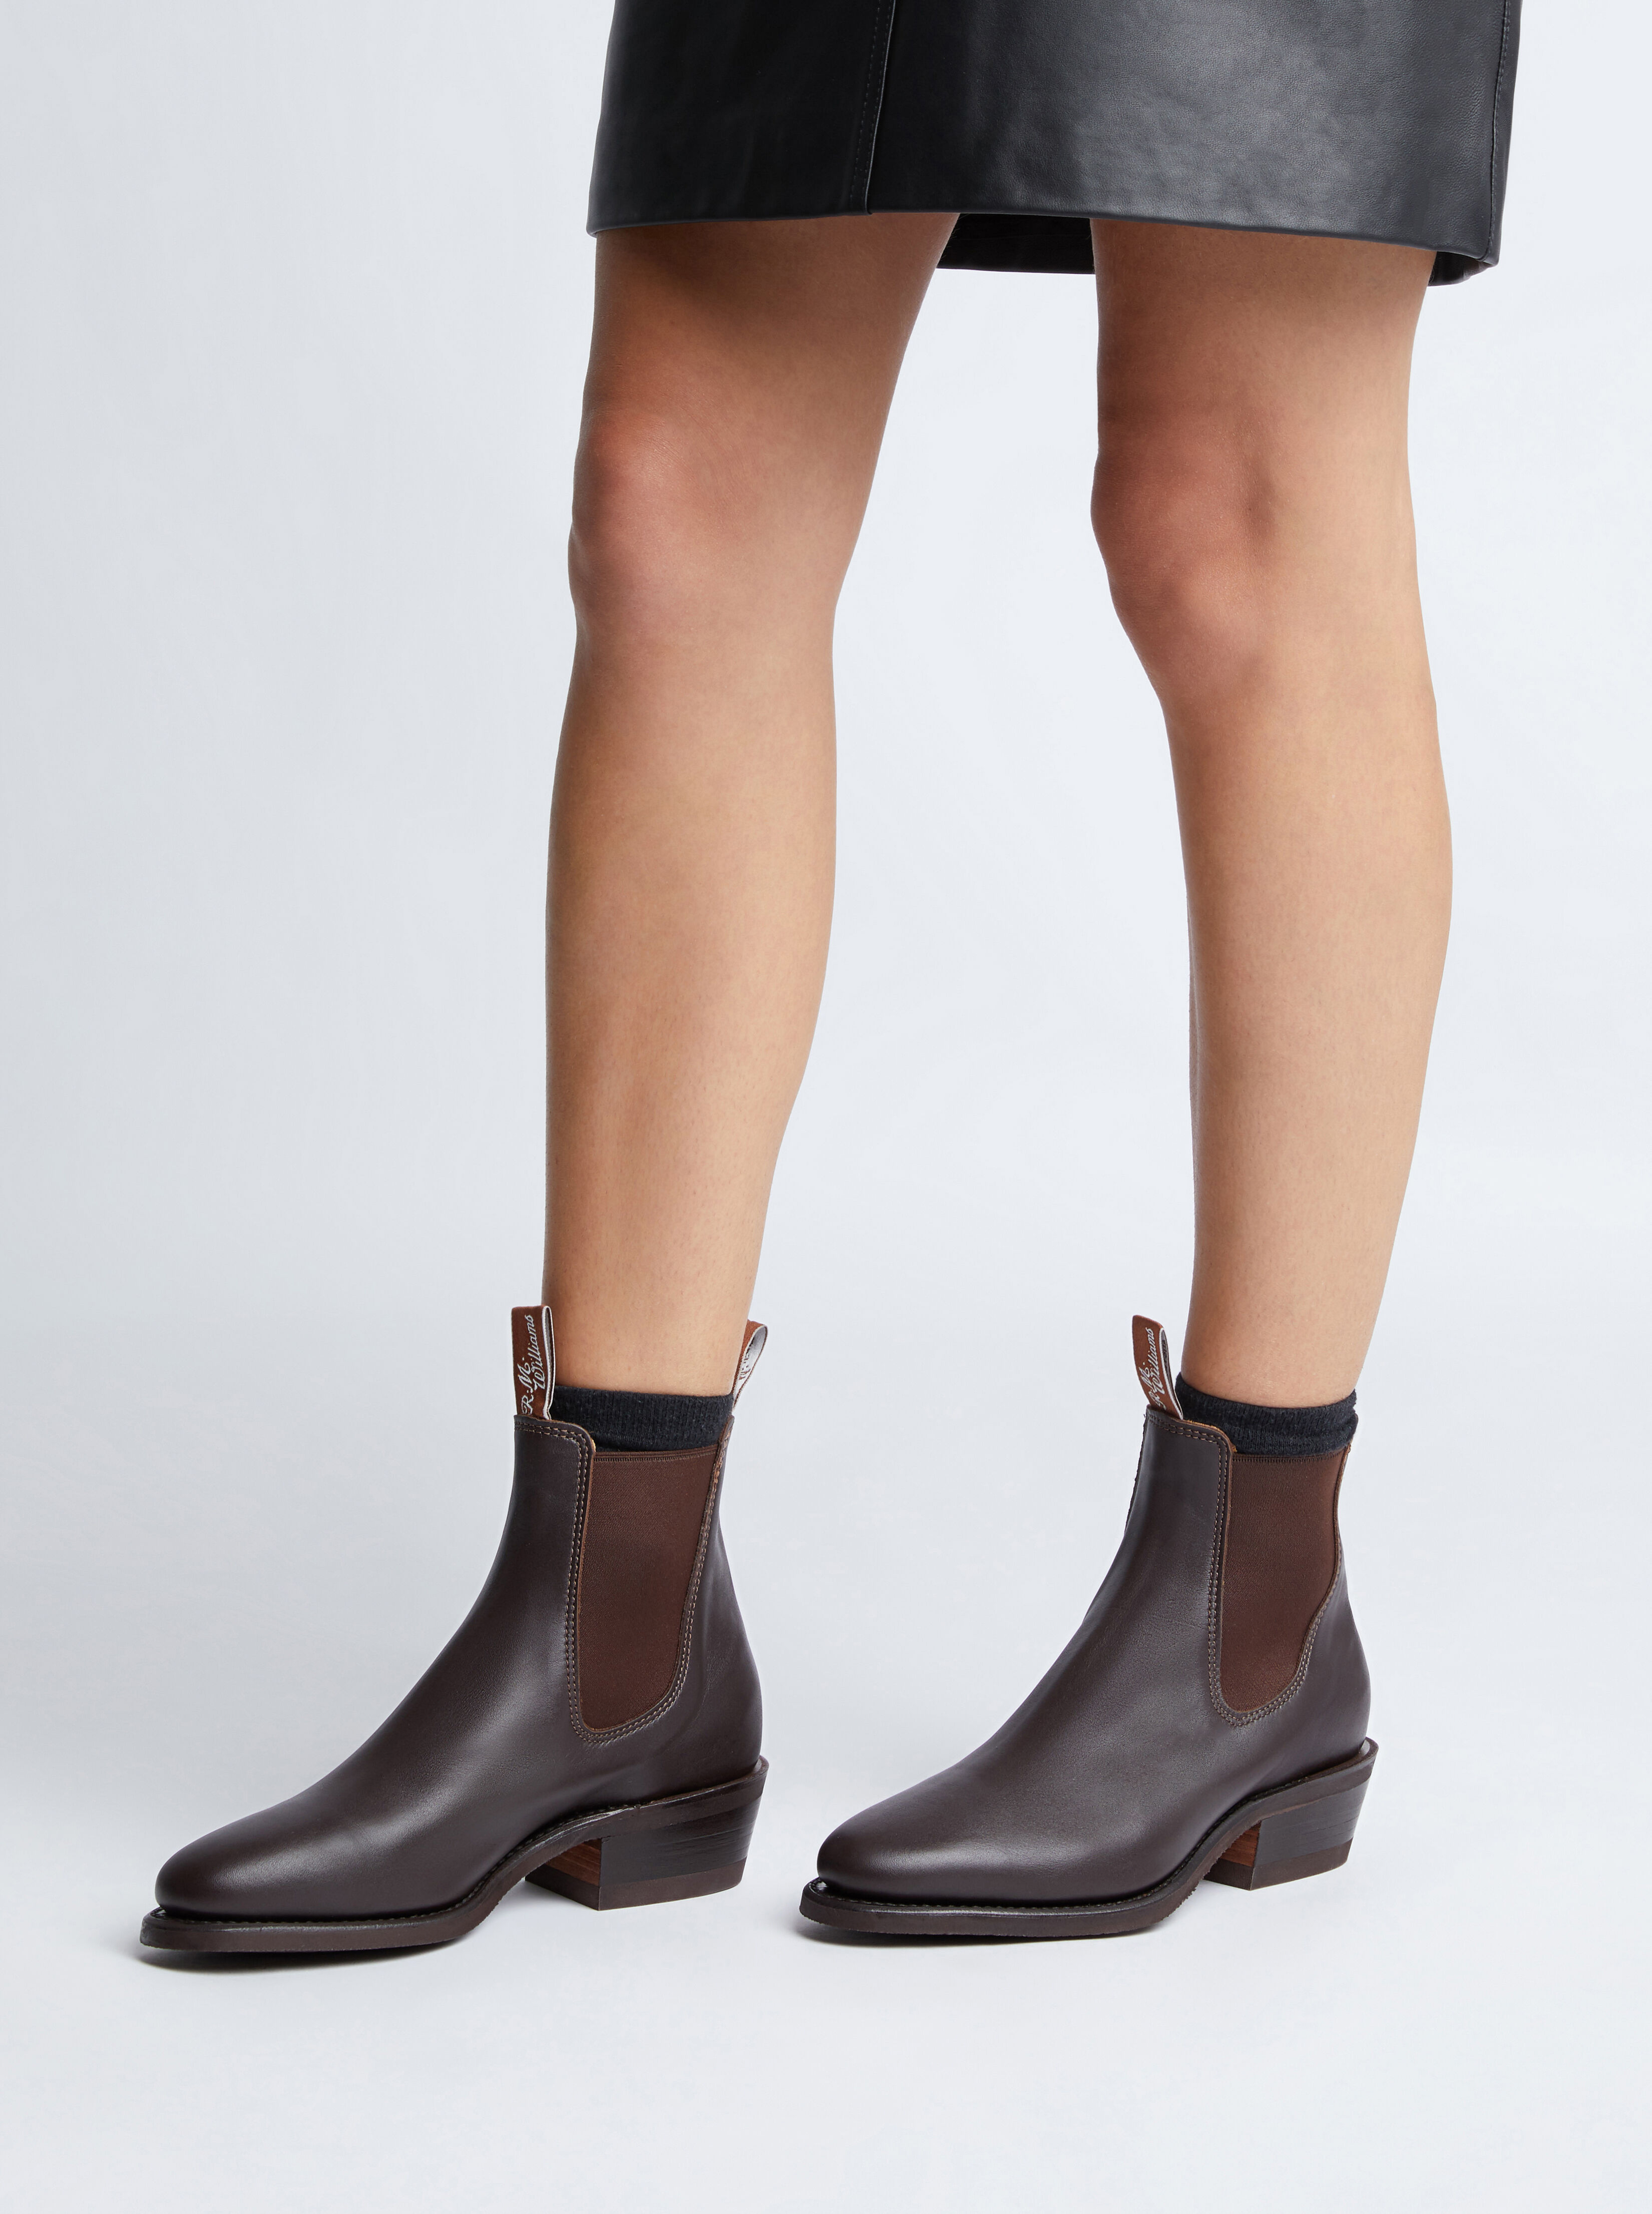 rm williams ankle boots